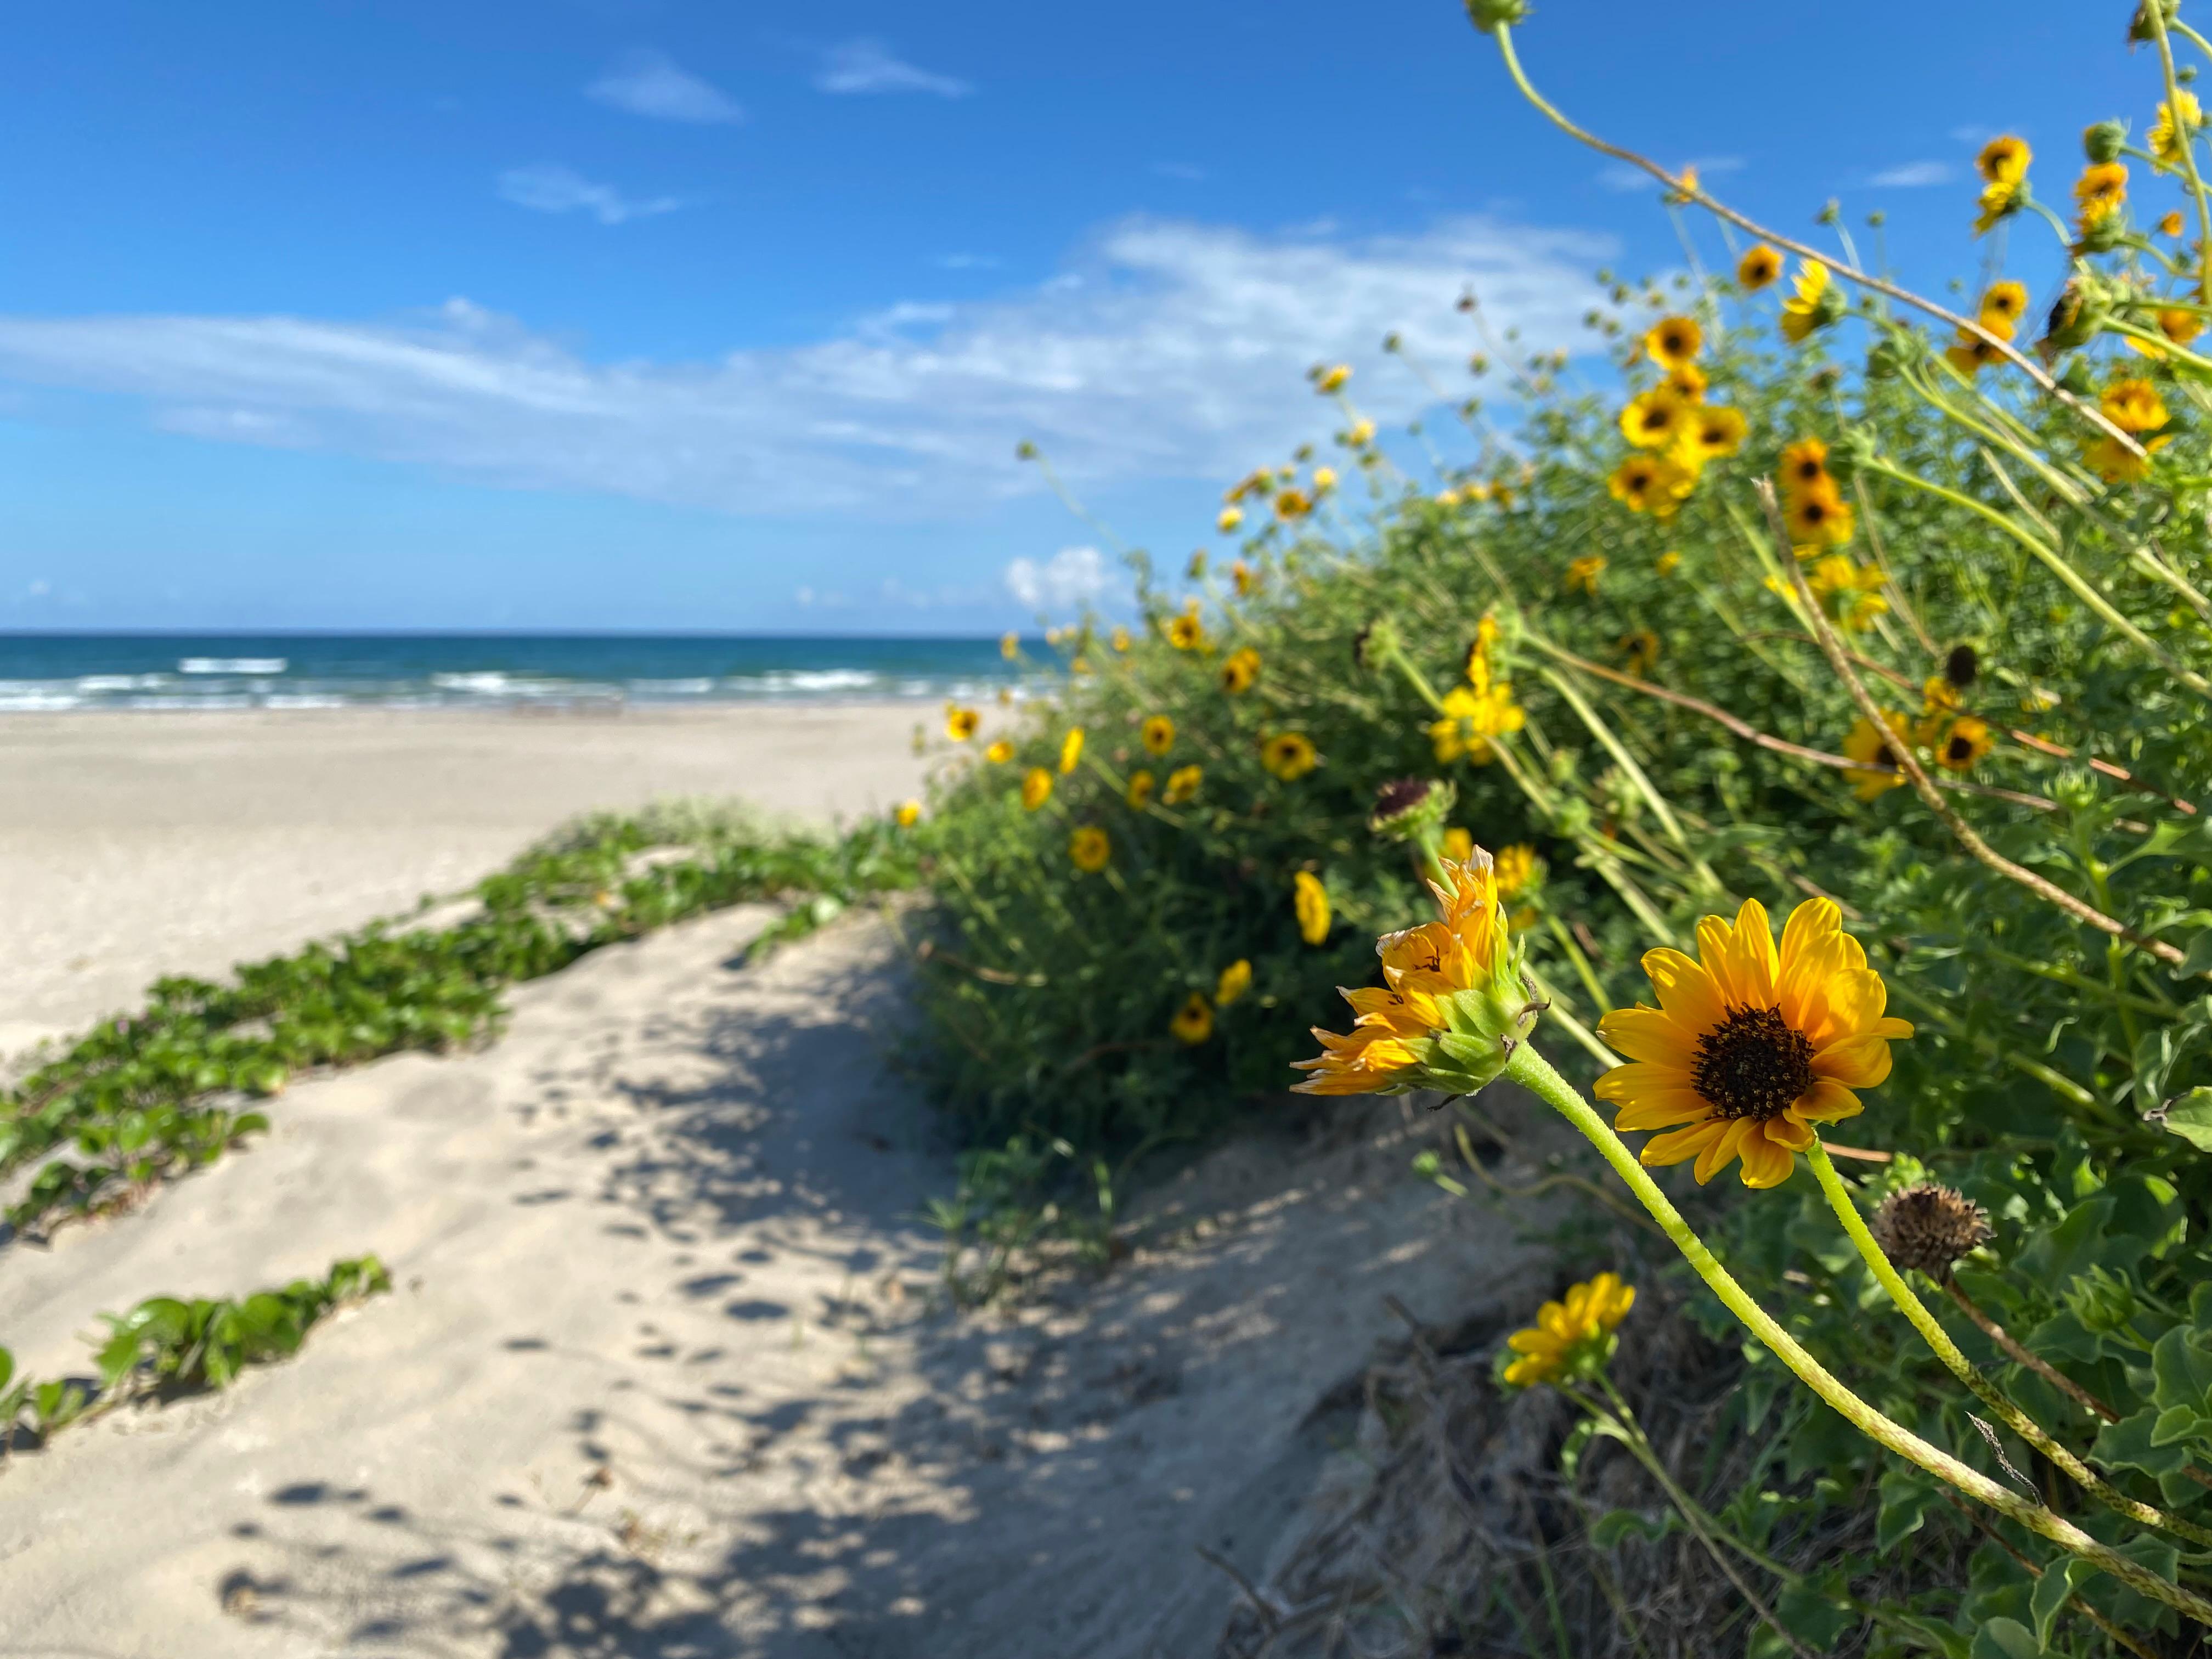 Yellow flowers bloom in the dunes along Malaquite Beach.